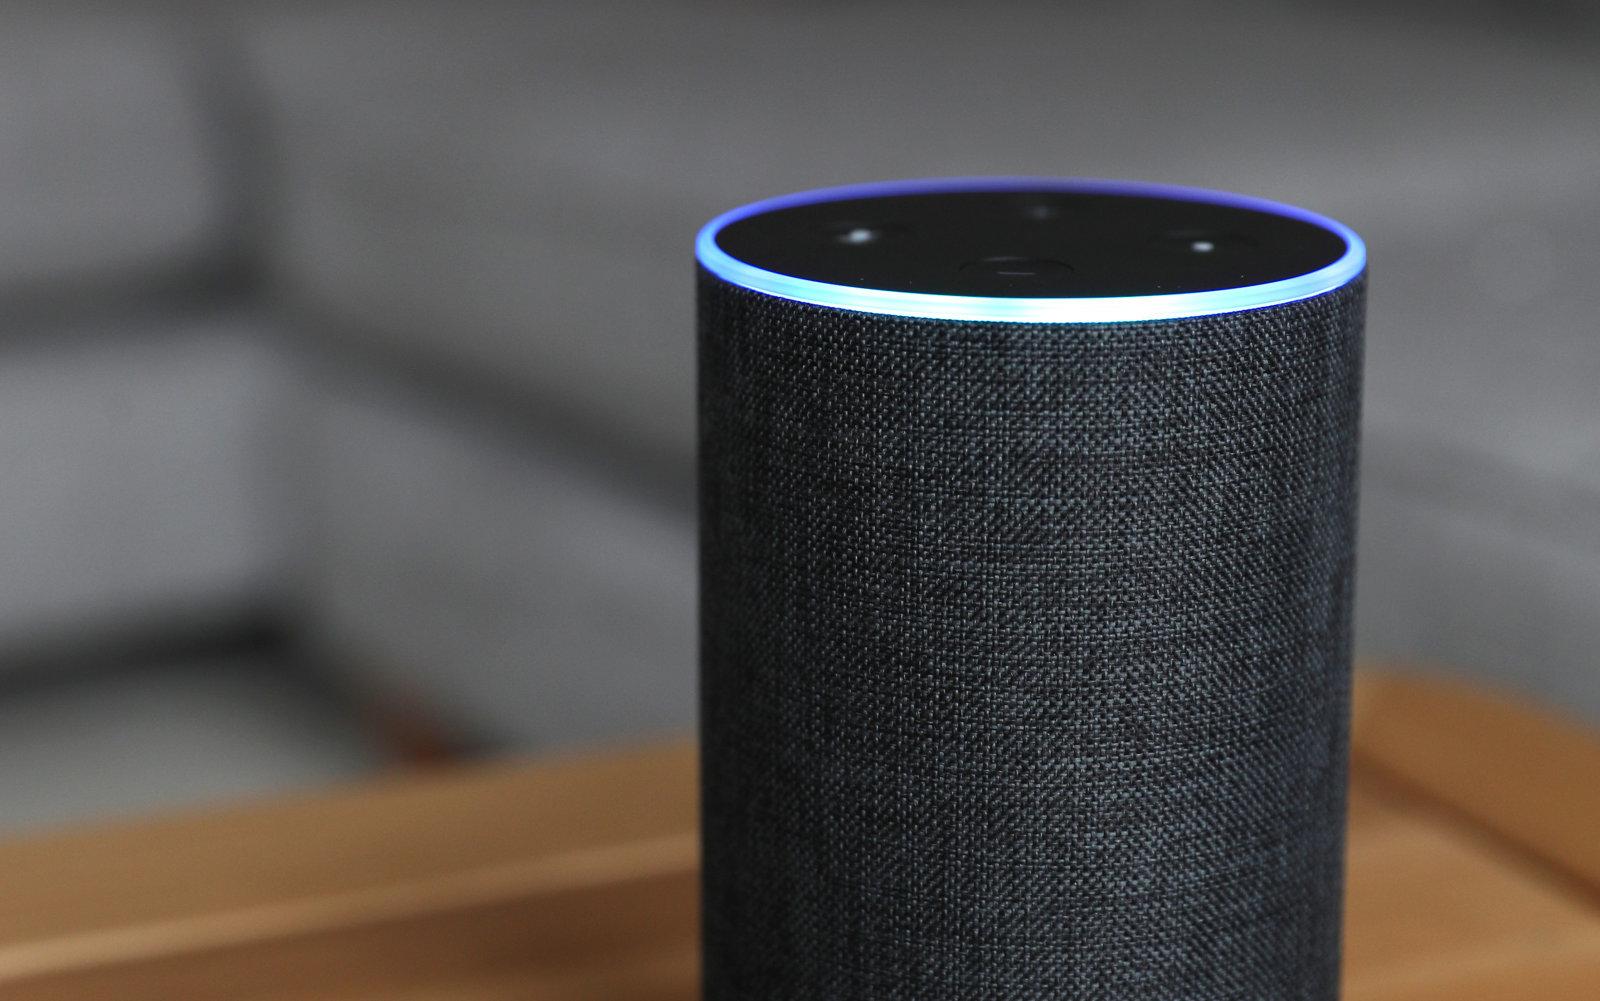 An Amazon Alexa turned on with a blue light around the rim.